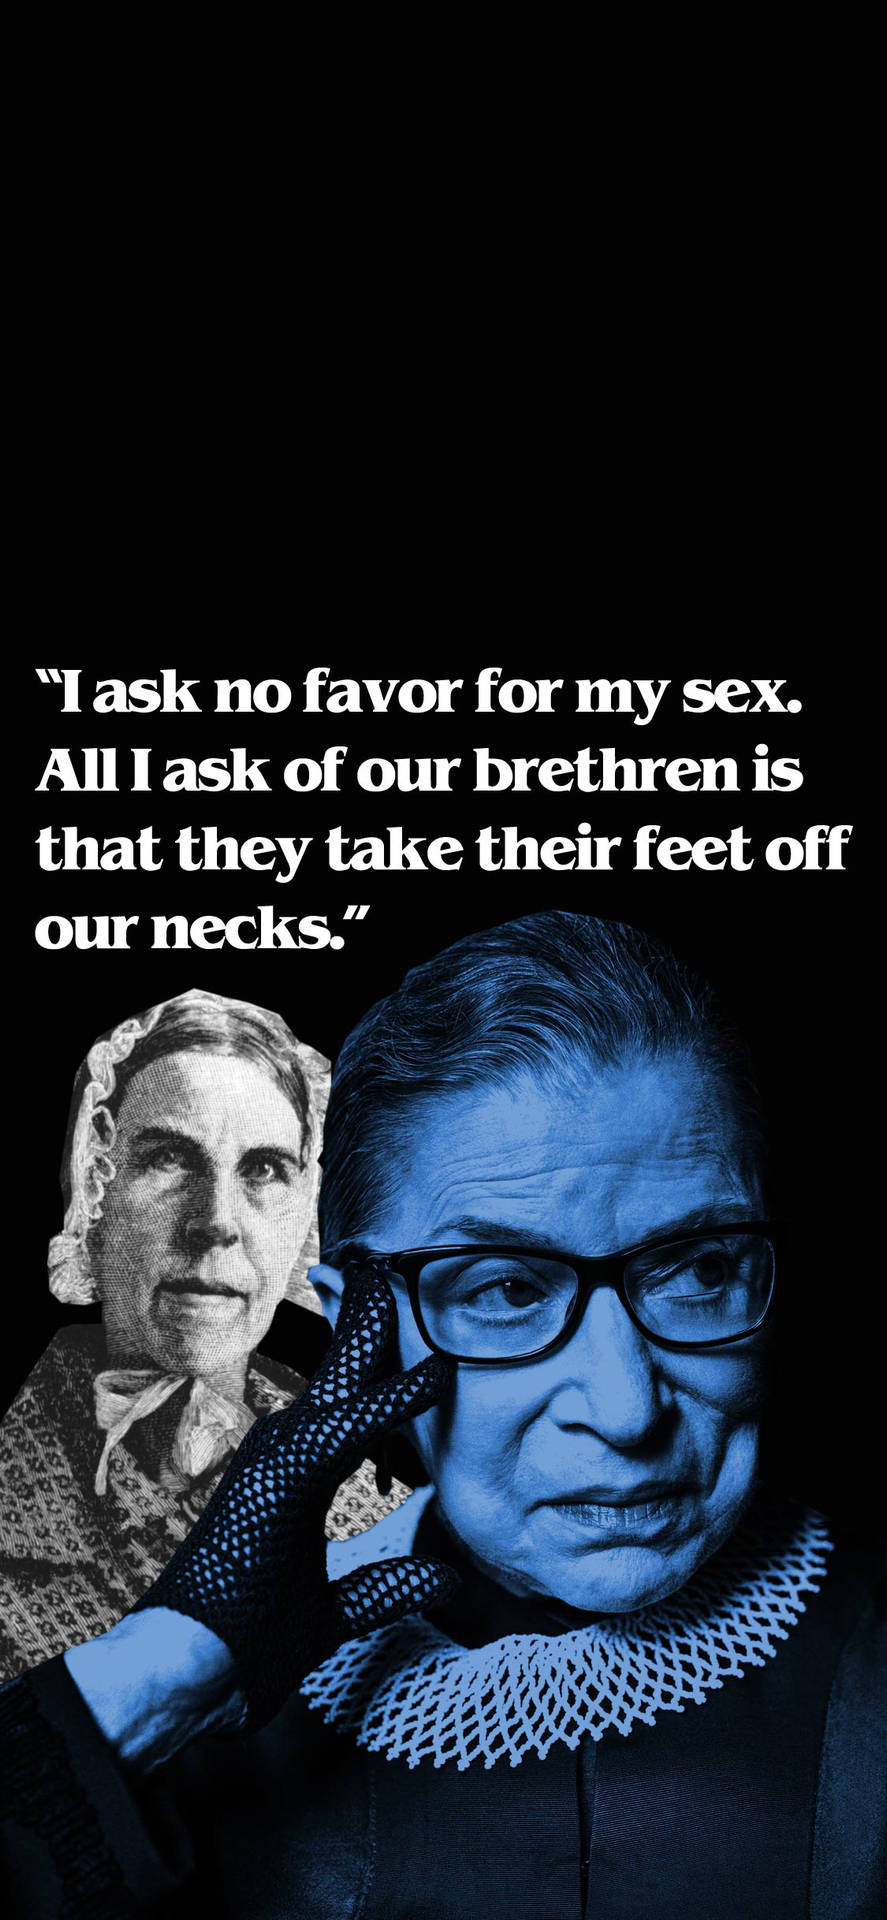 Ruth Bader Ginsburg Monochromatic Blue Poster Background